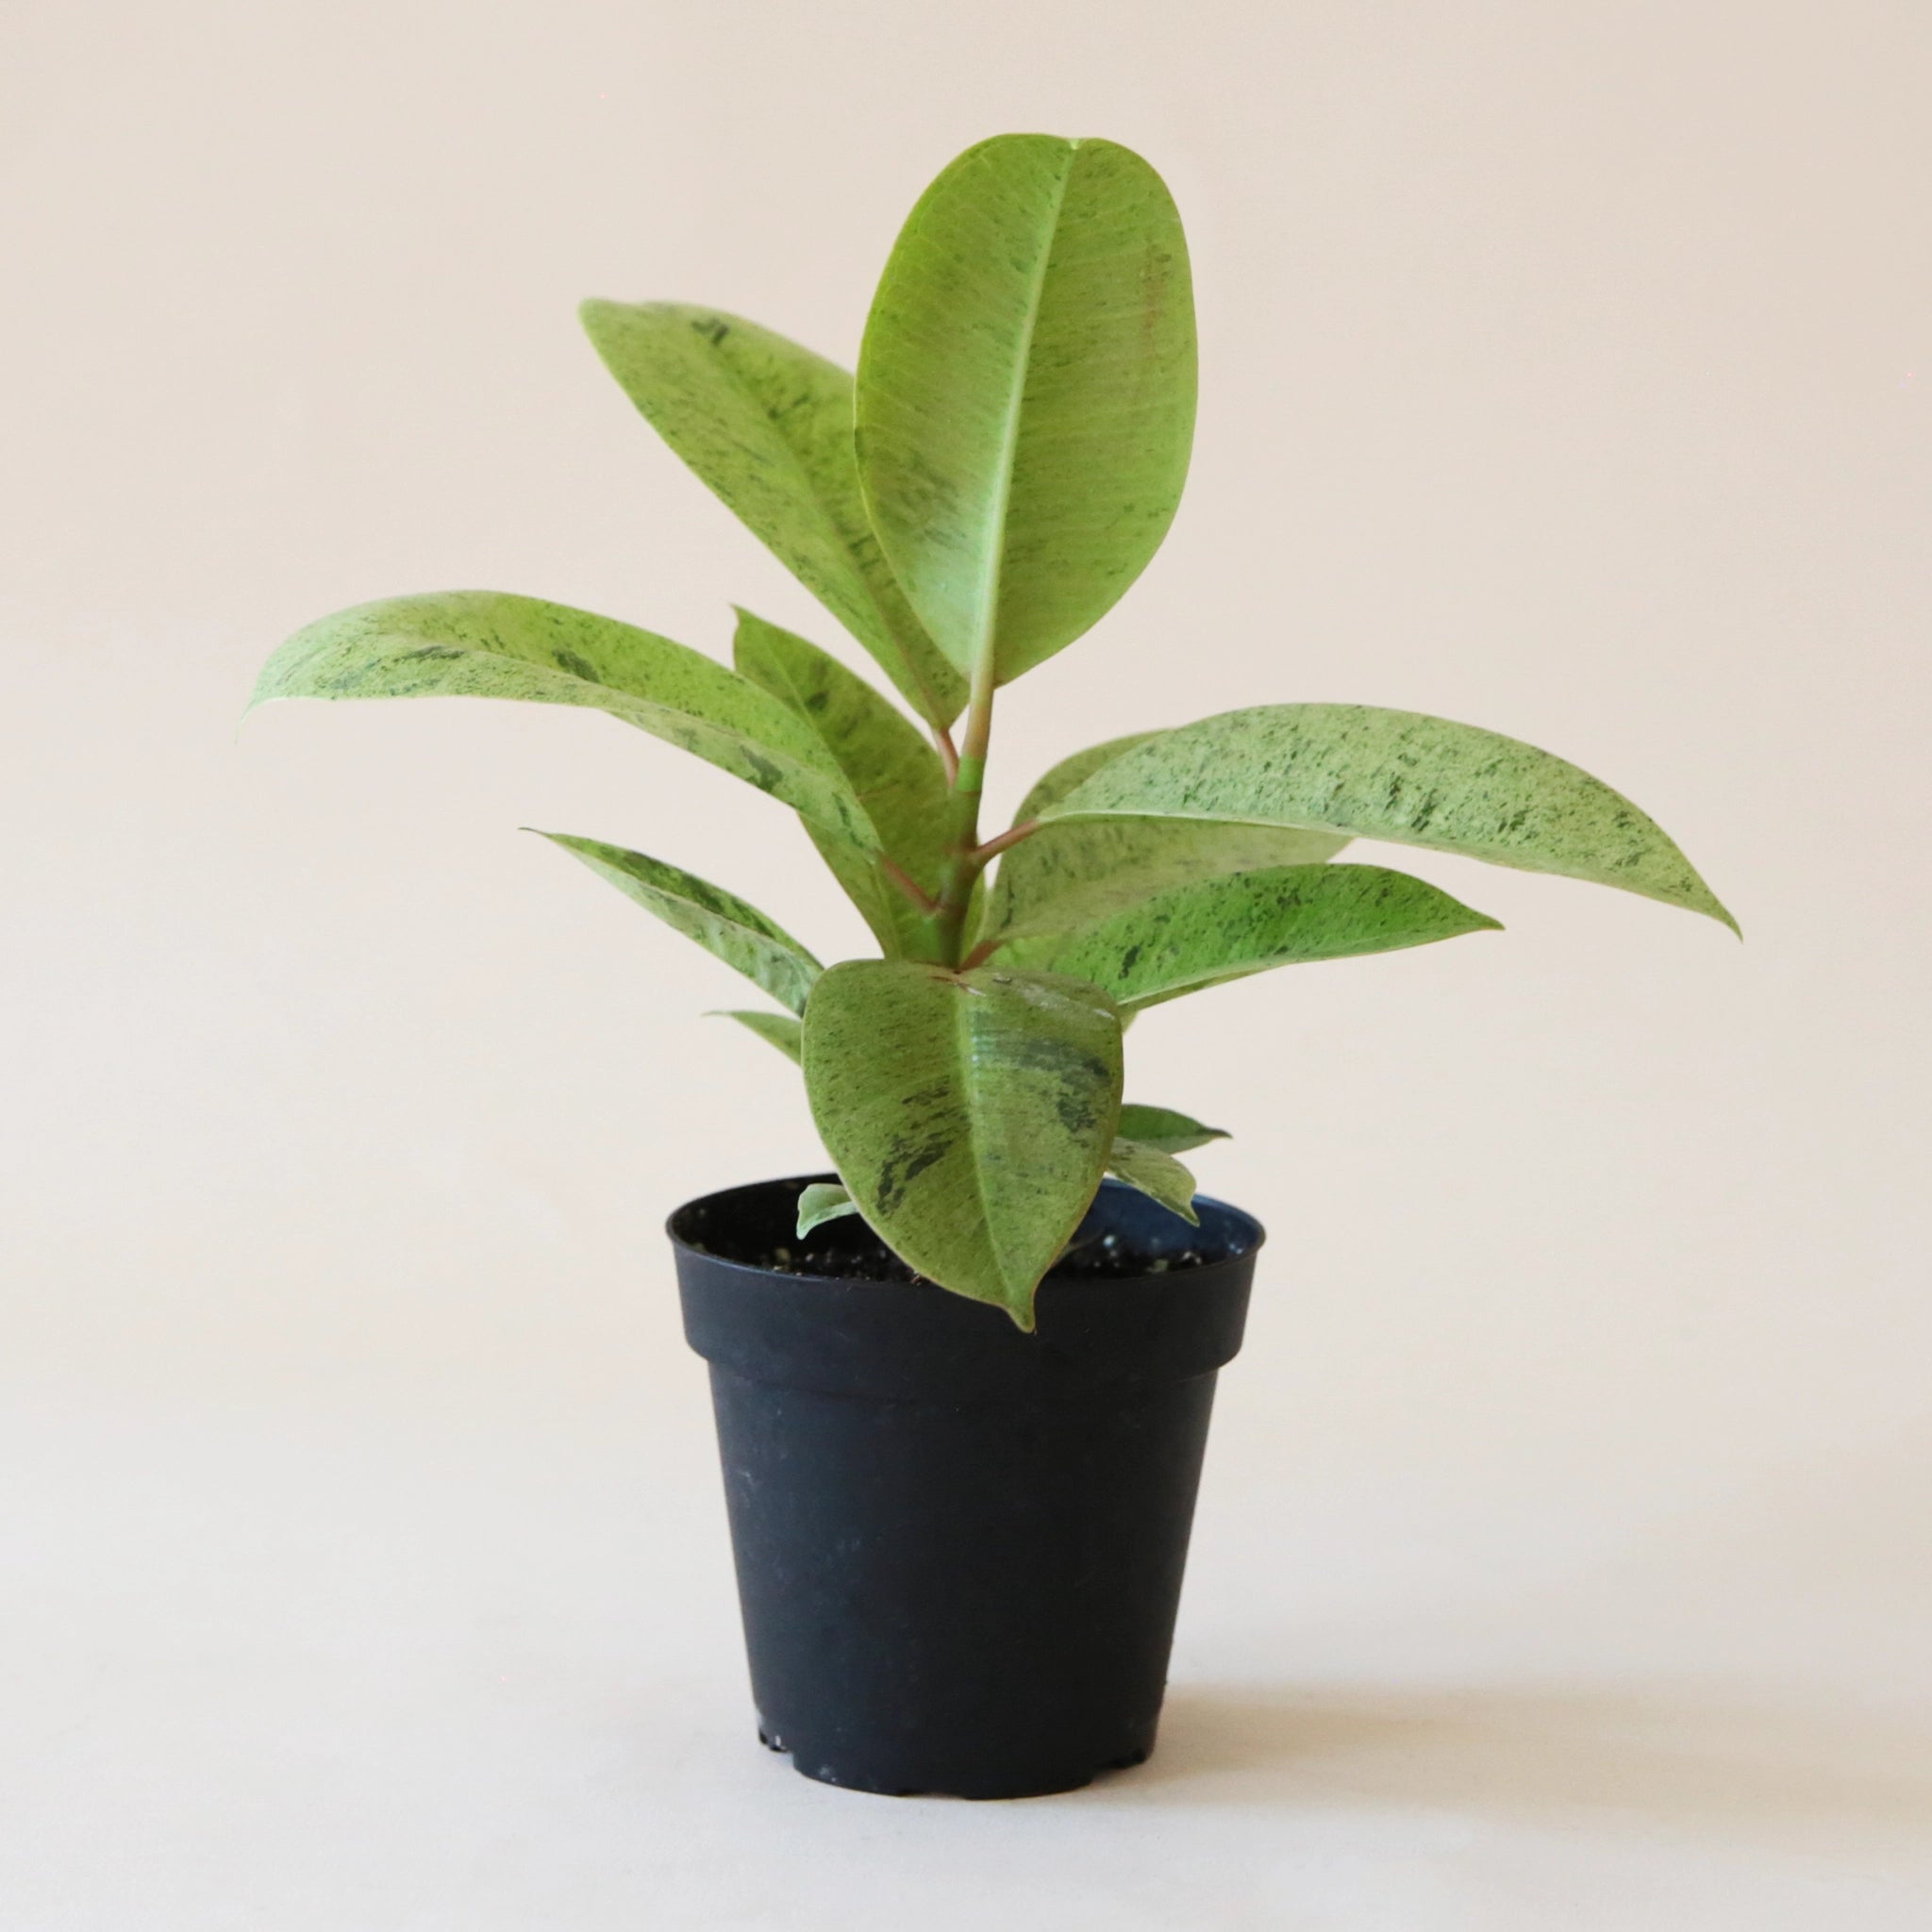 On a cream background is a Ficus Shiverieana with green leaves.